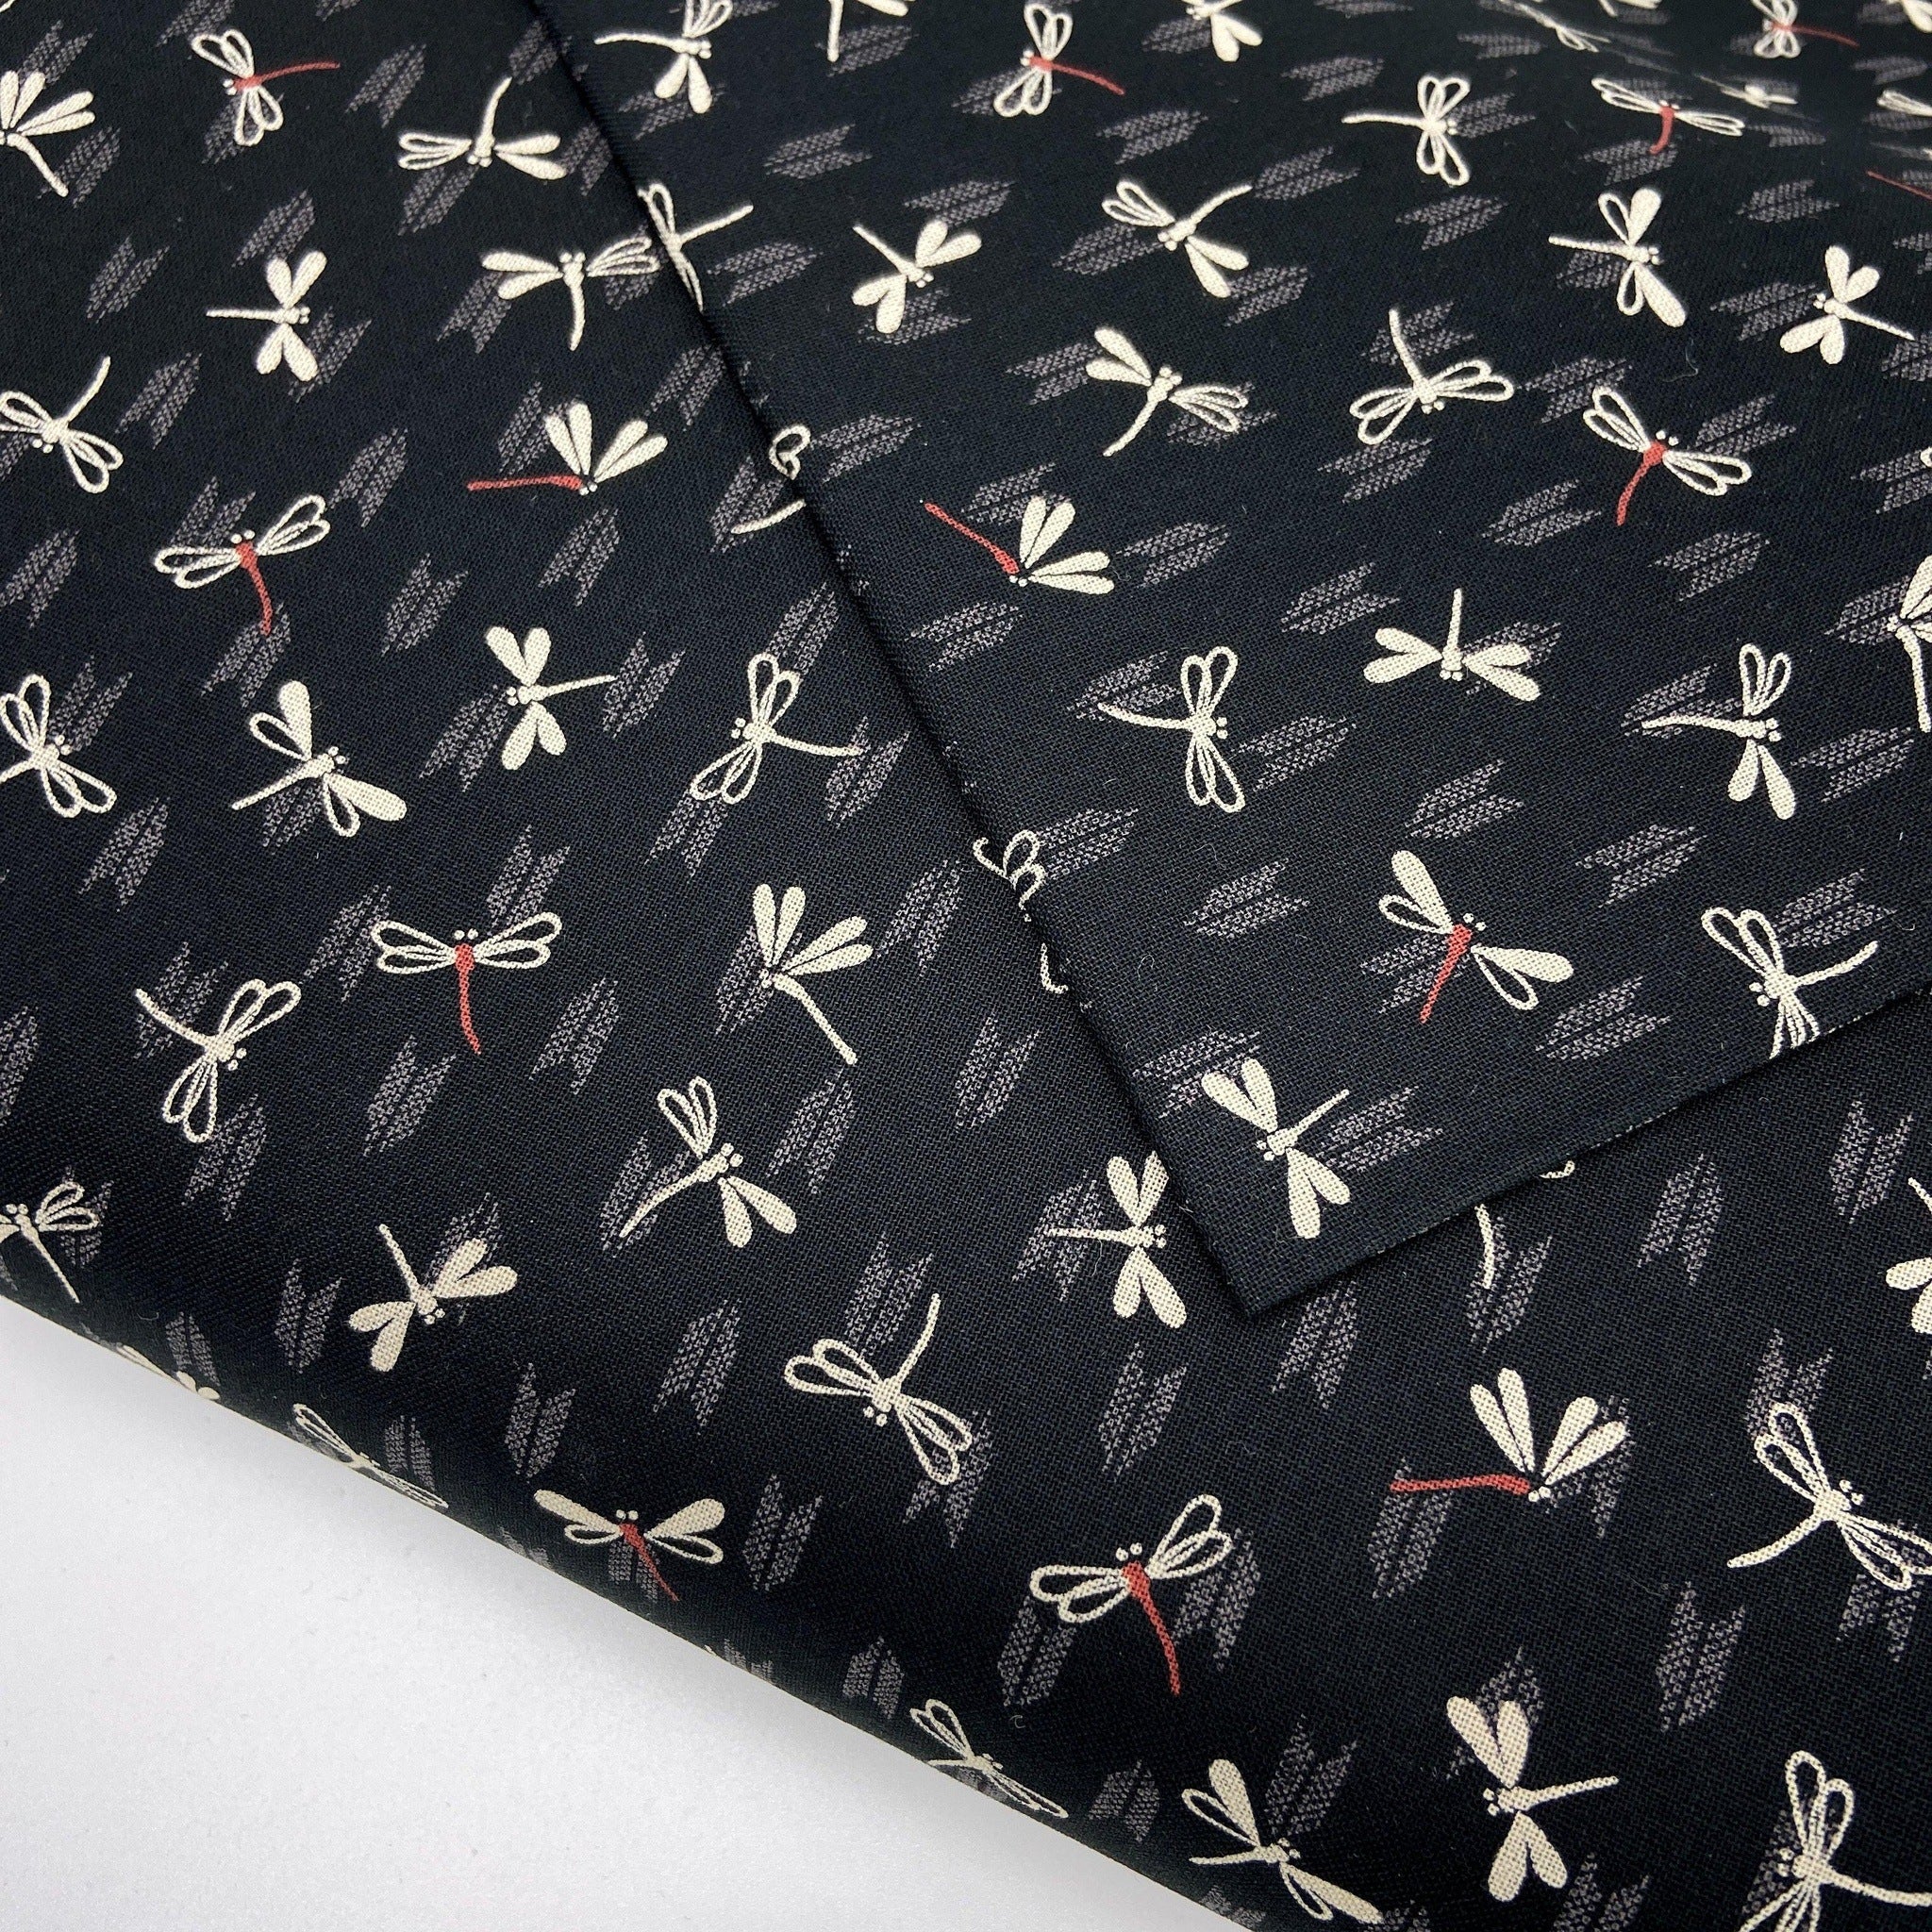 Japanese Cotton Sheeting Print - Dragonflies with Arrows Black - Earth Indigo